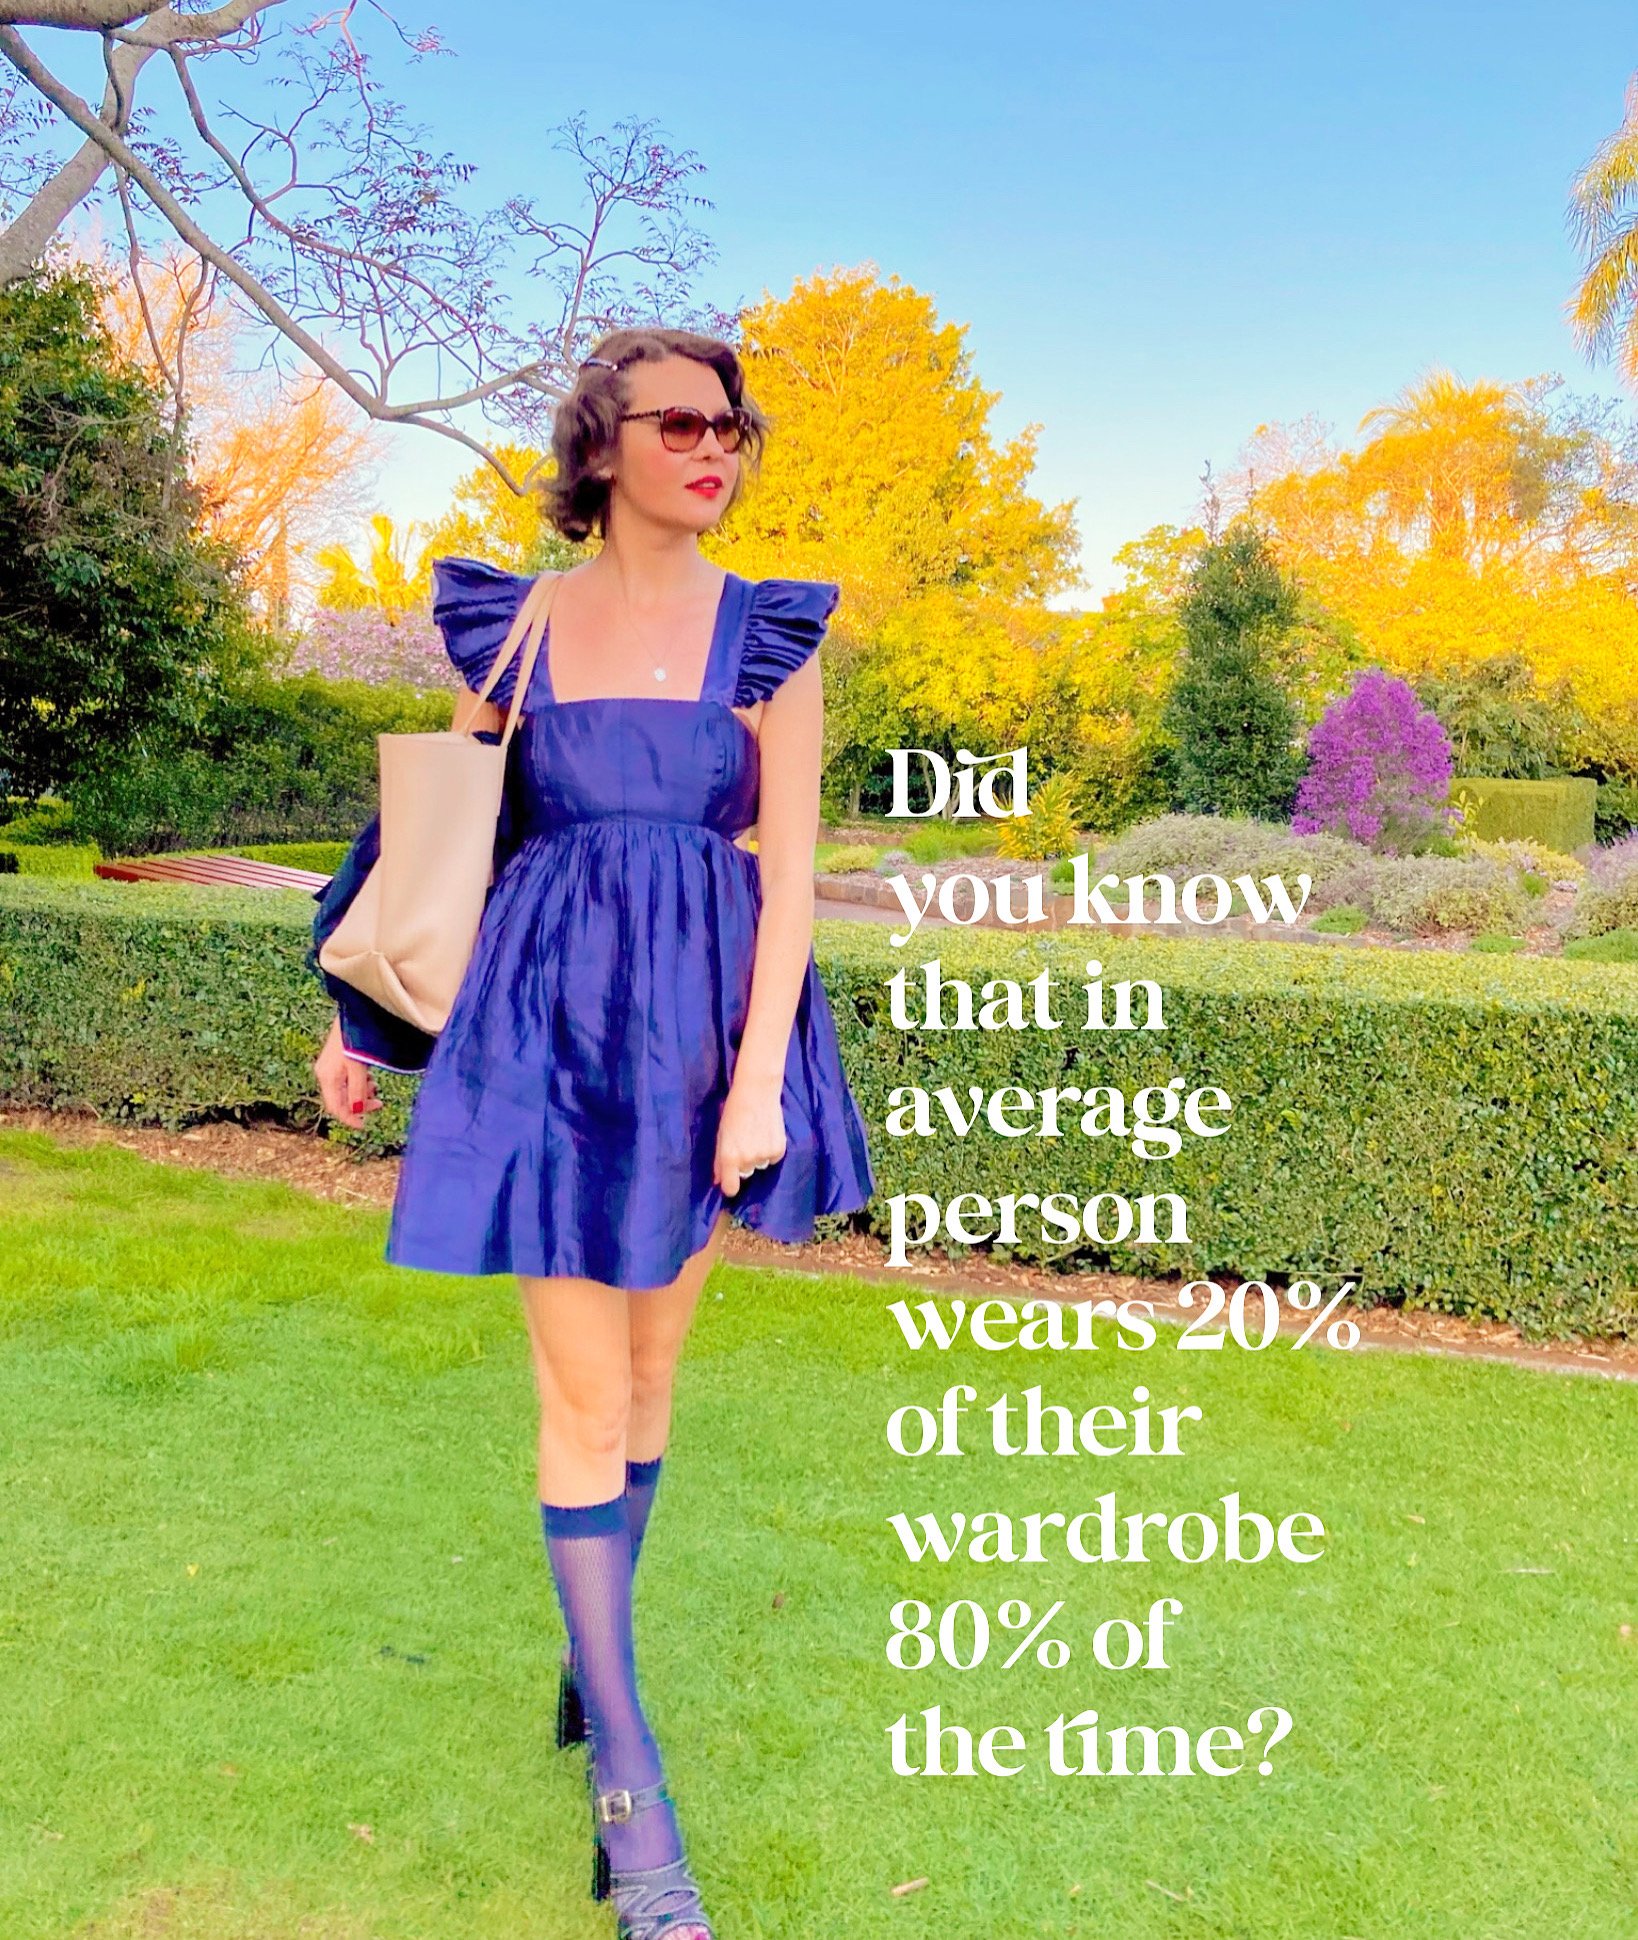 Did you know that in average person wears 20% of their wardrobe 80% of the time? 